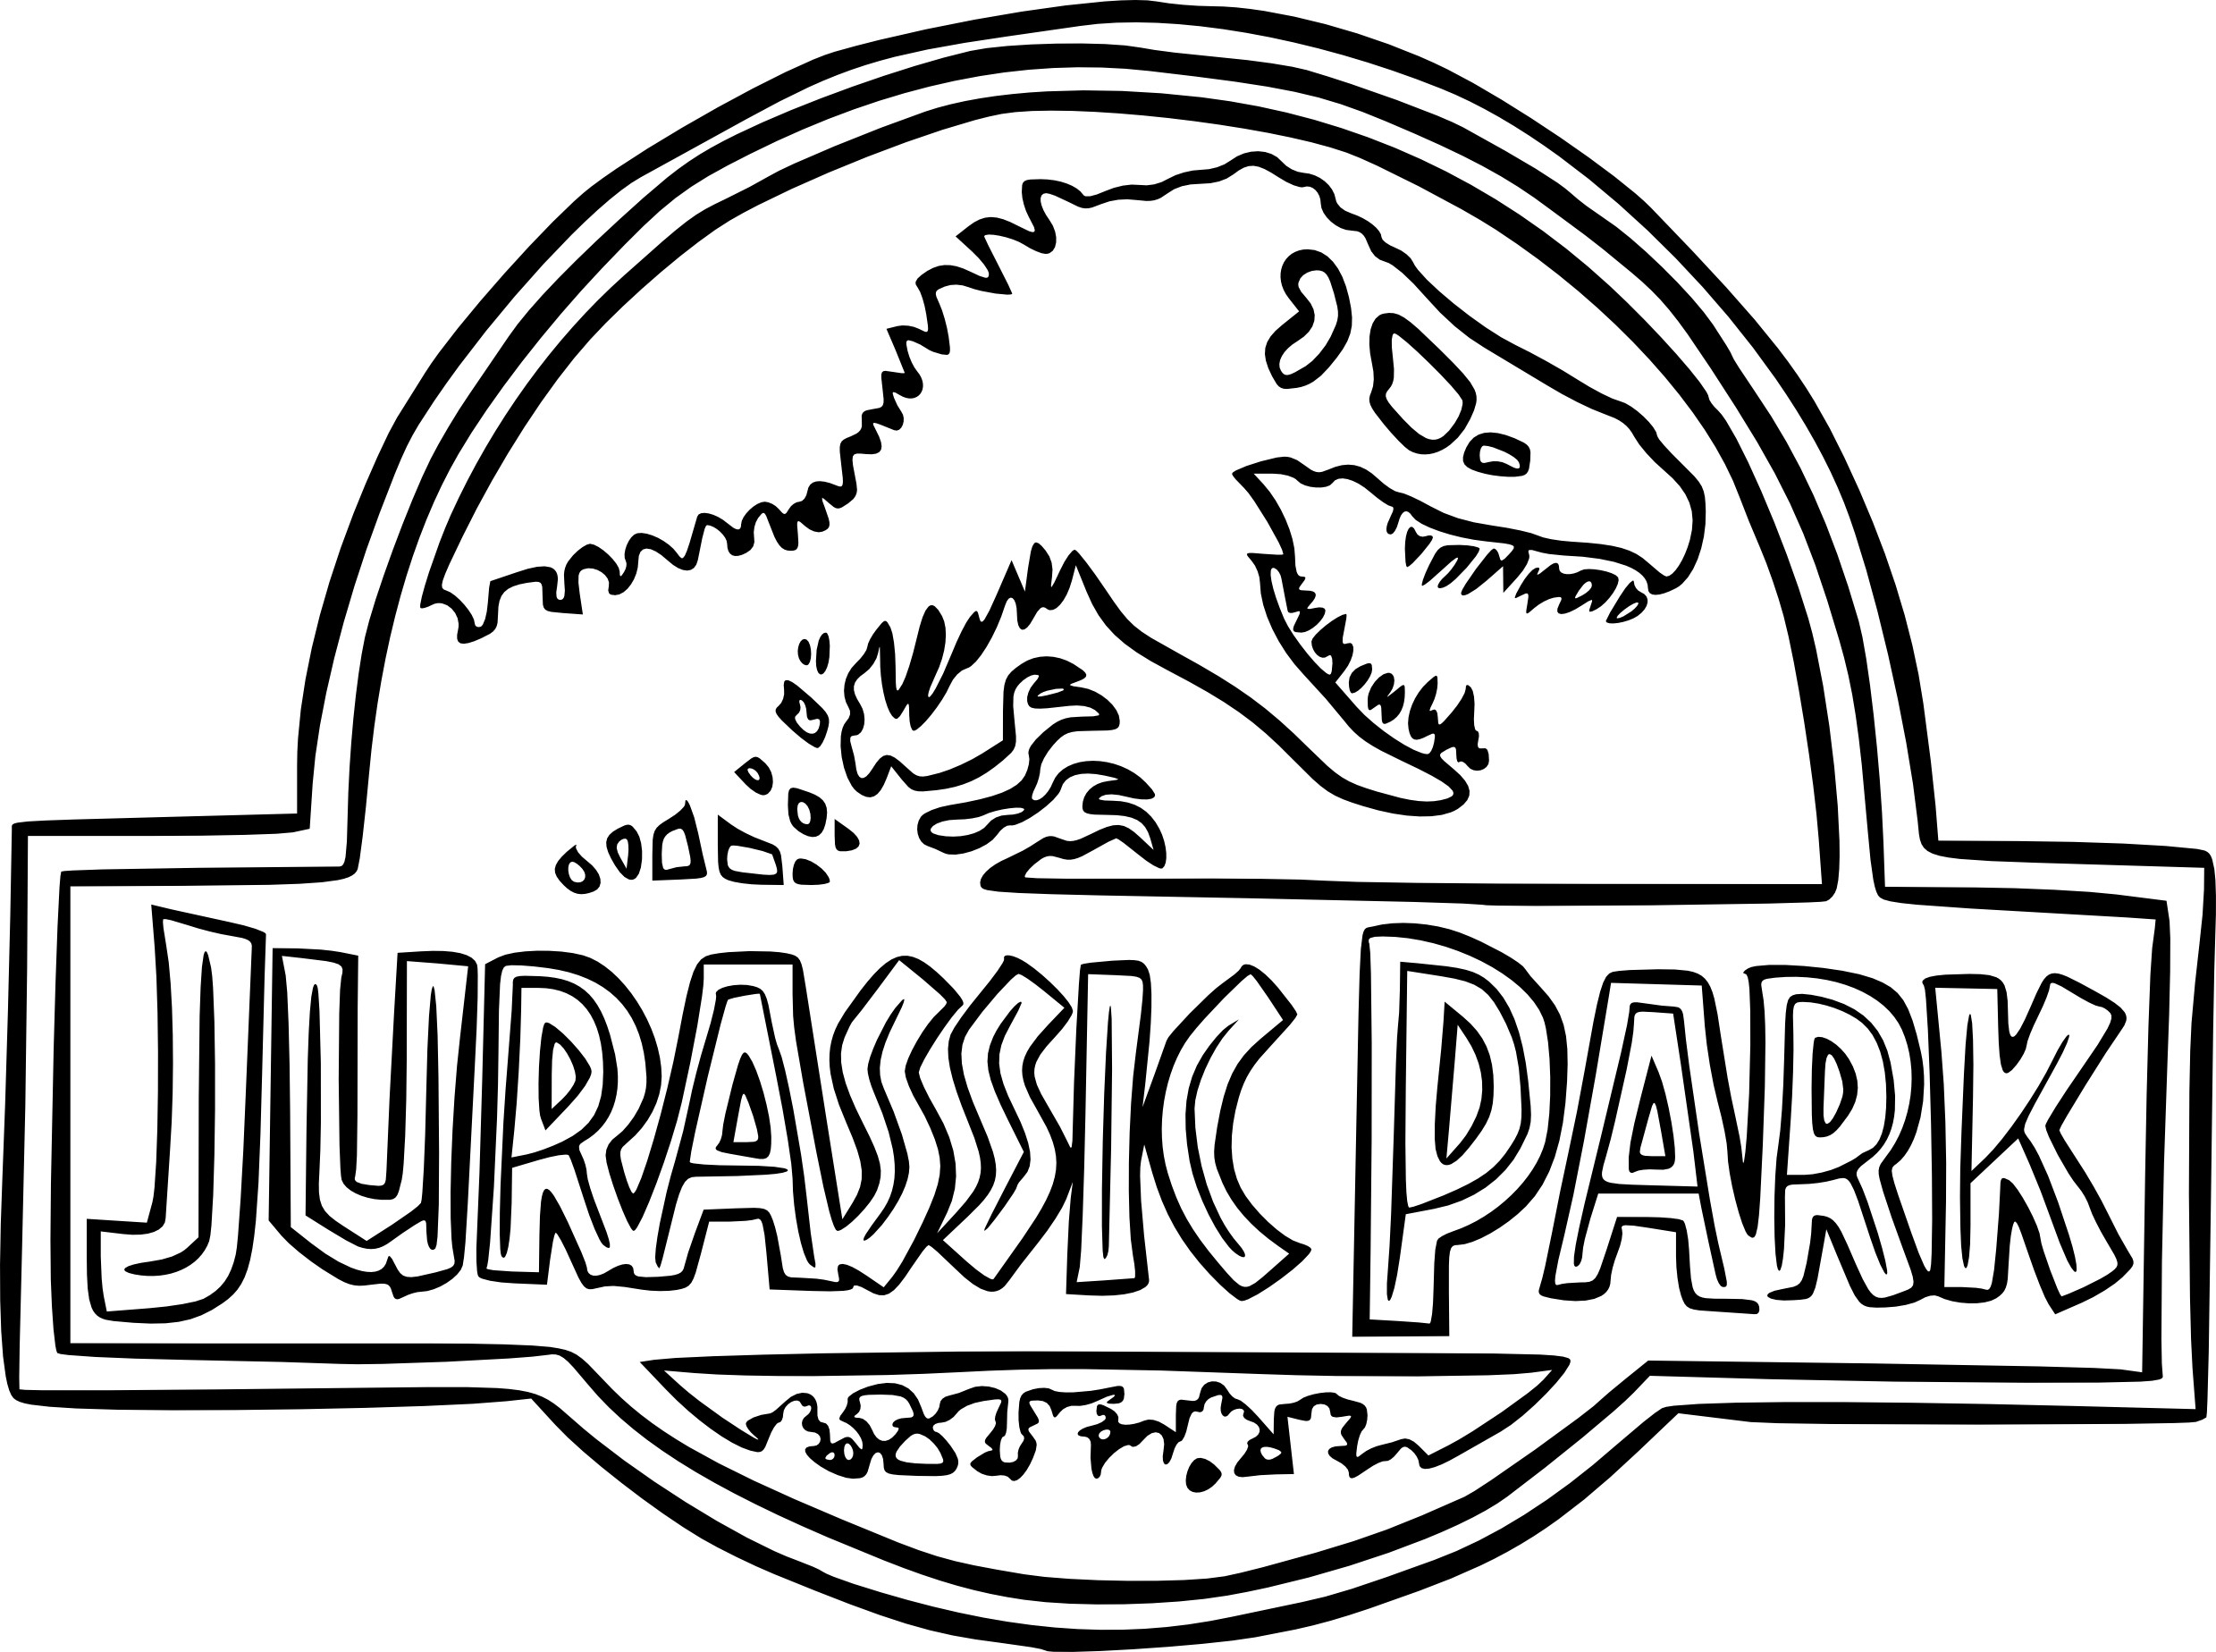 Jurassic Park Coloring Pages at GetColorings.com | Free printable